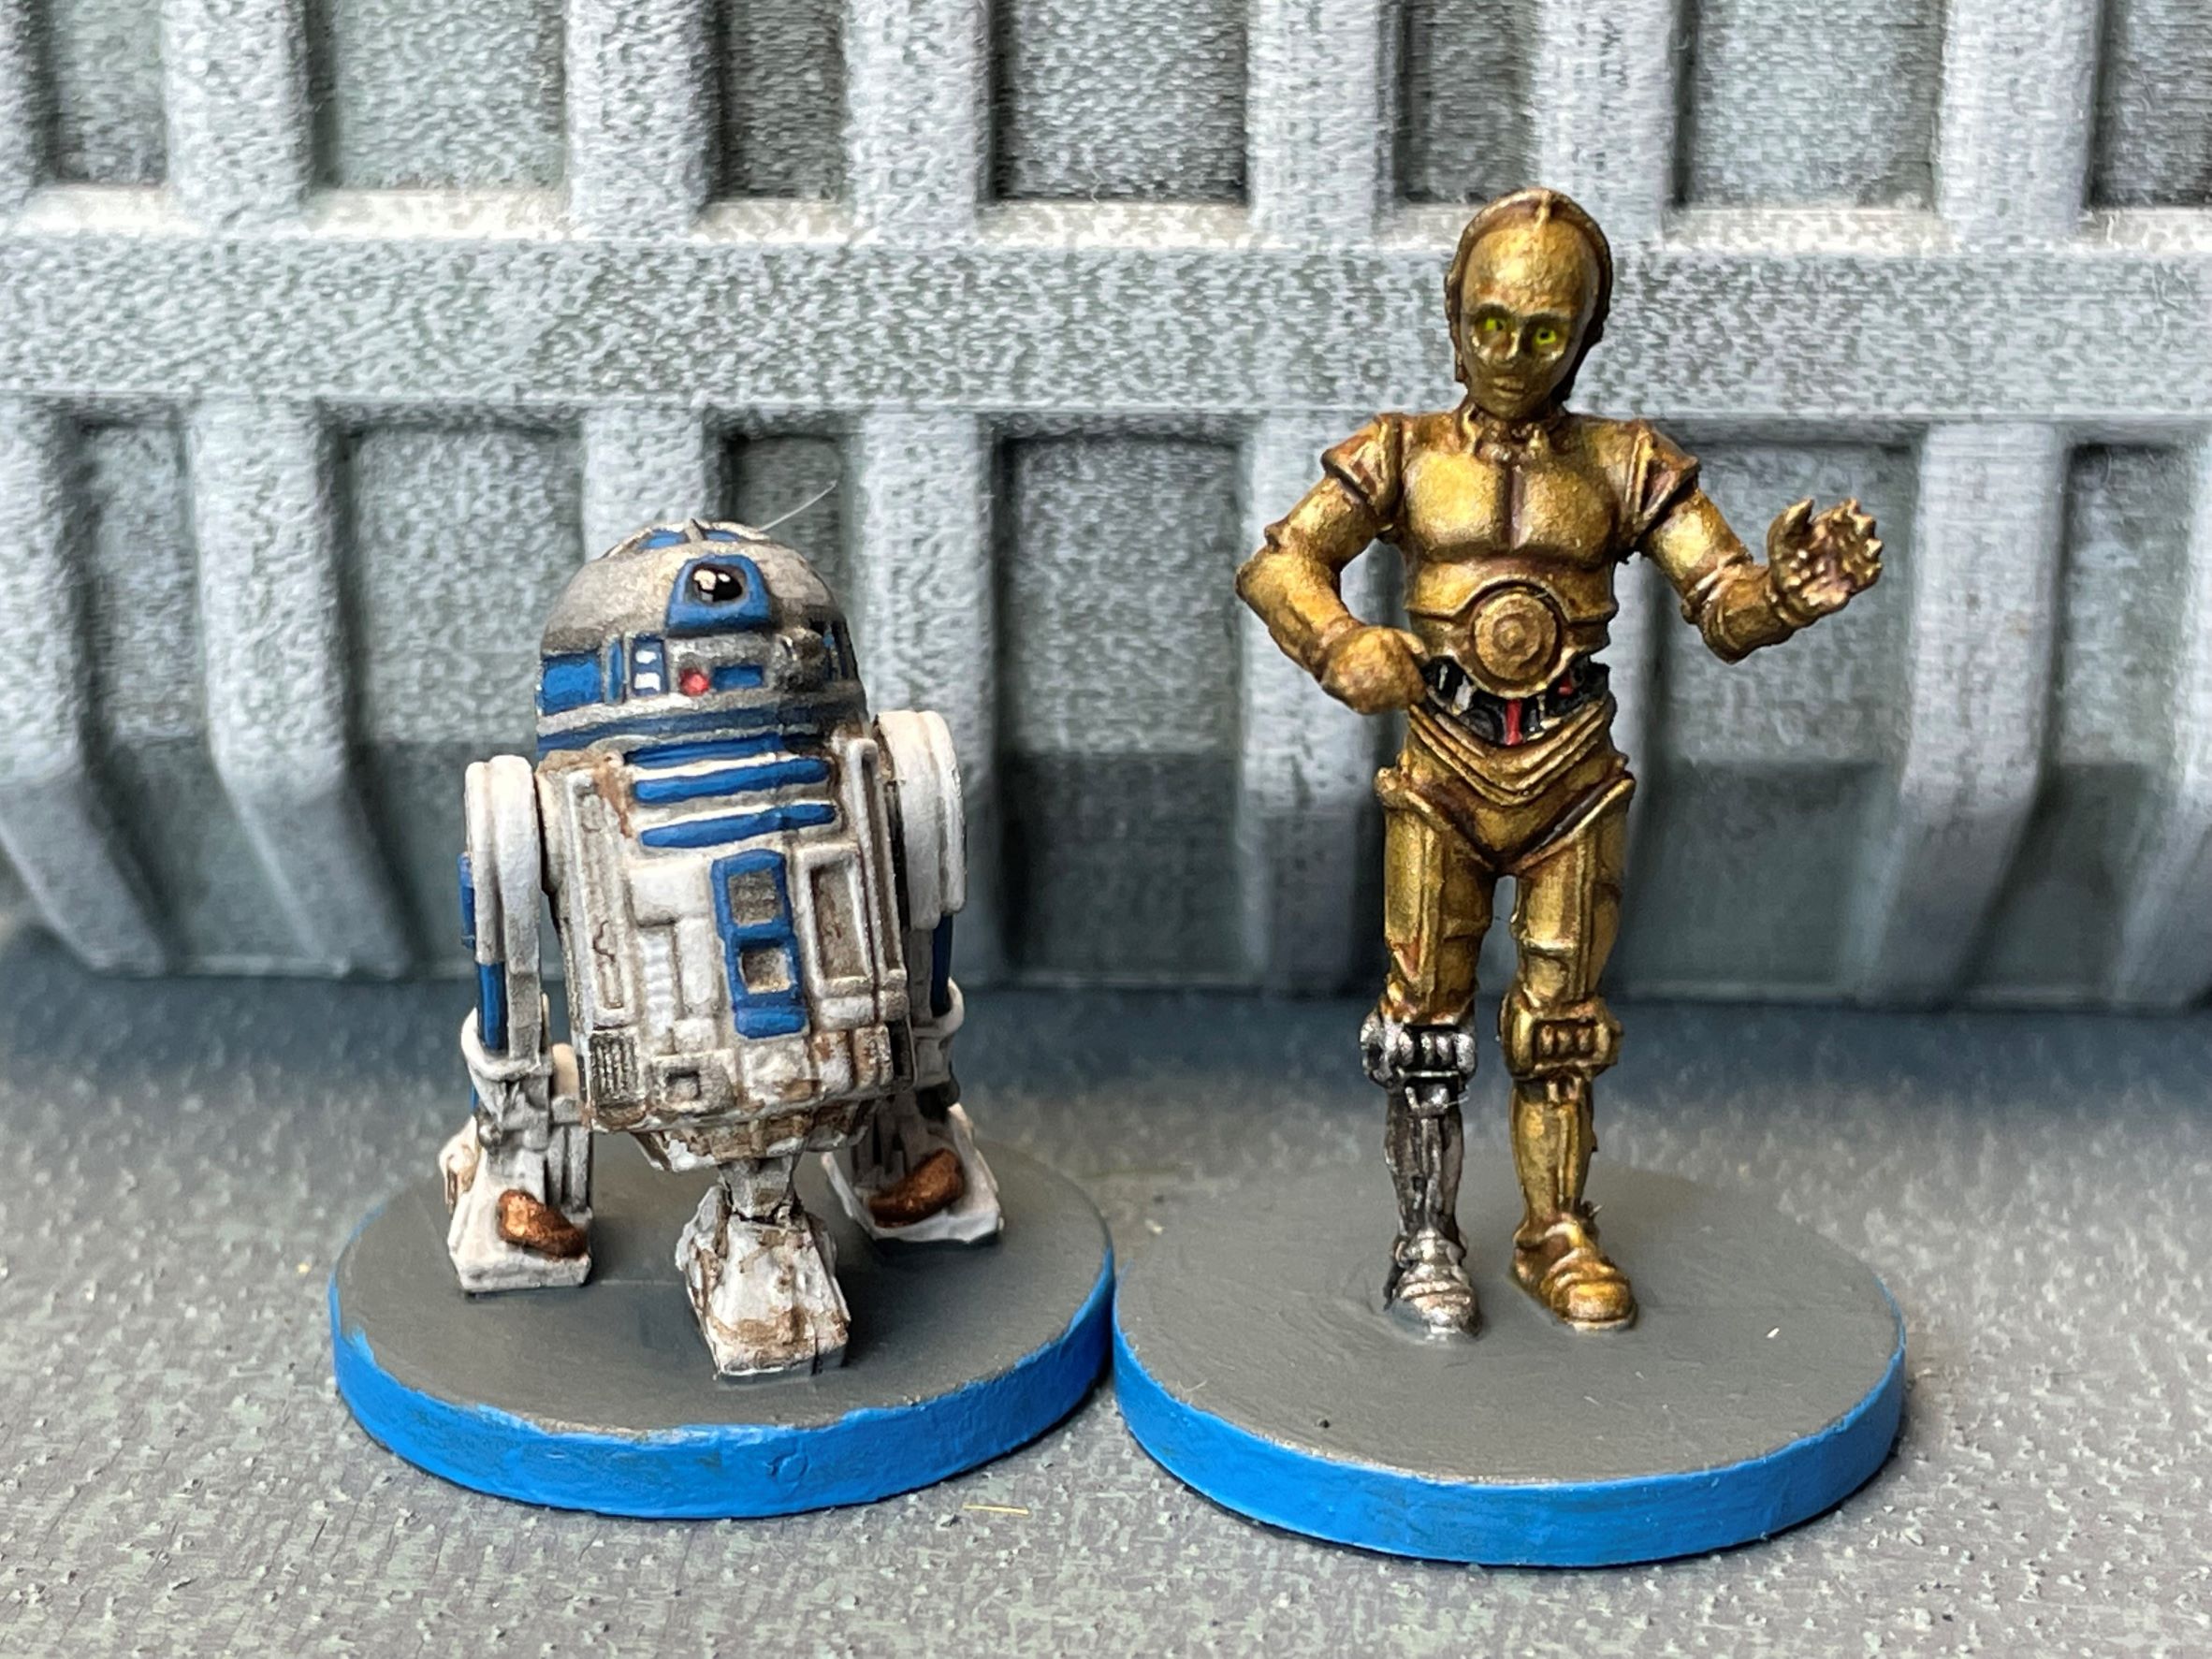 for sale online Imperial Assault 2015, Game R2-D2 and C-3PO Ally Pack 